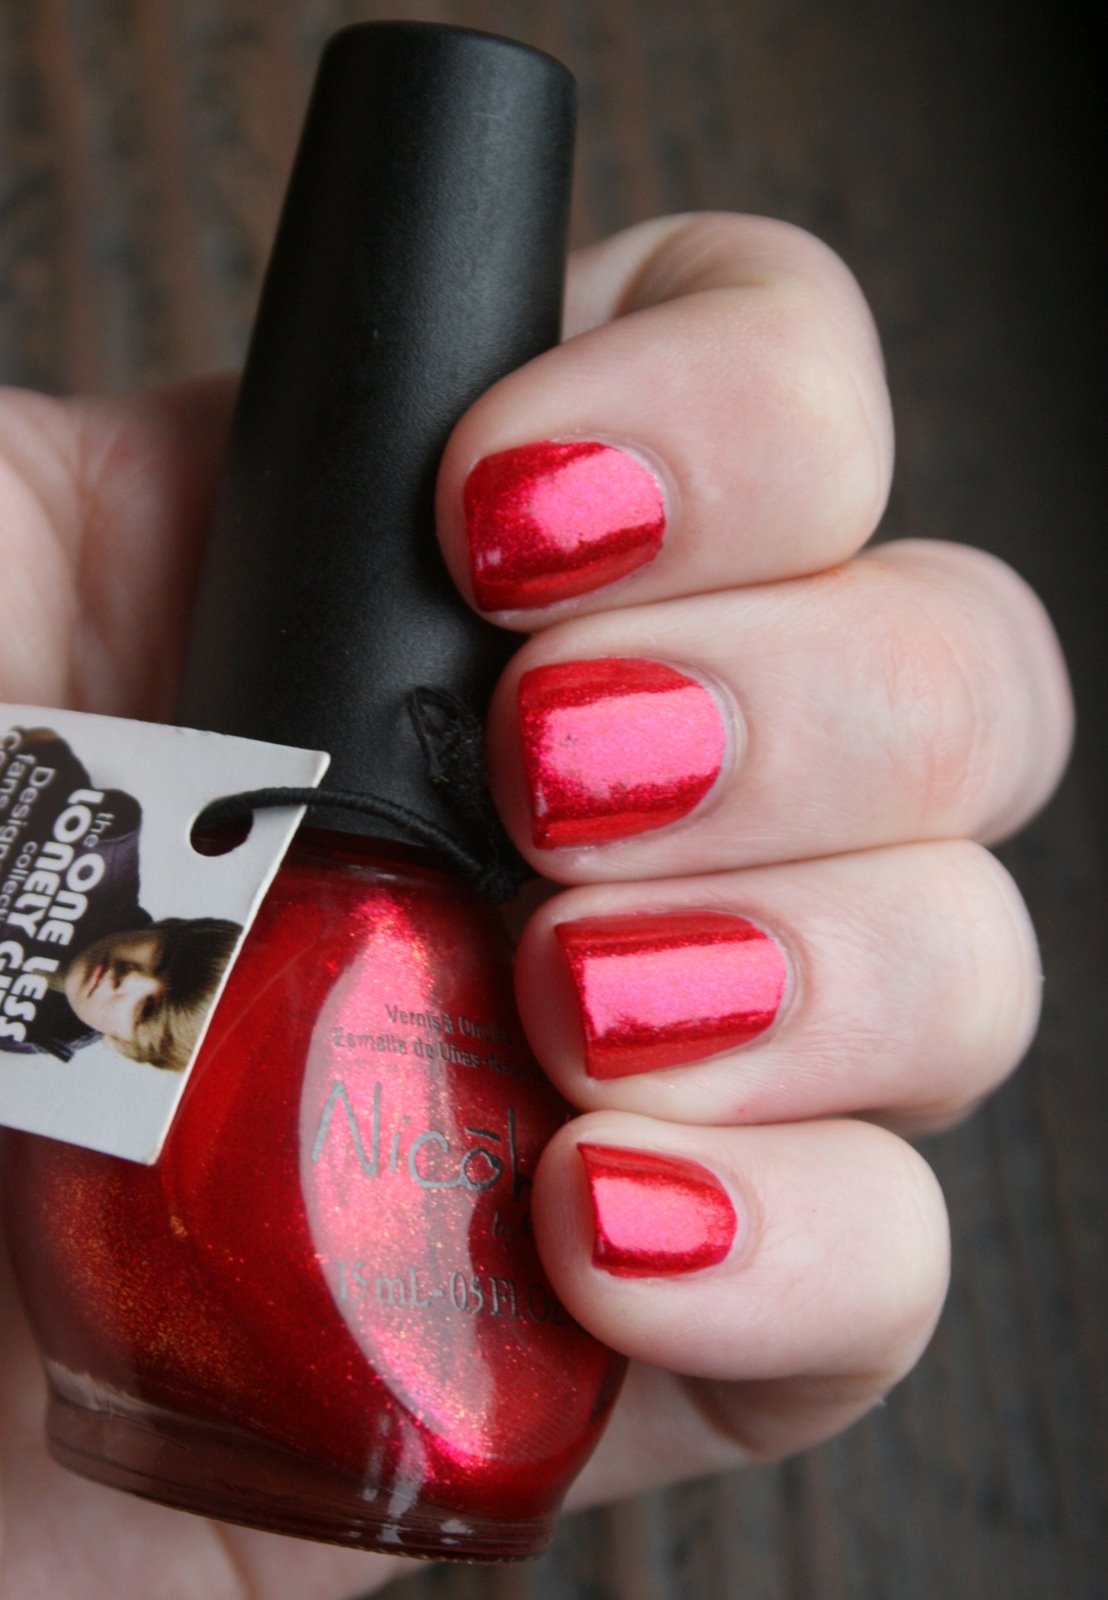 Nicole by OPI OMB! swatch